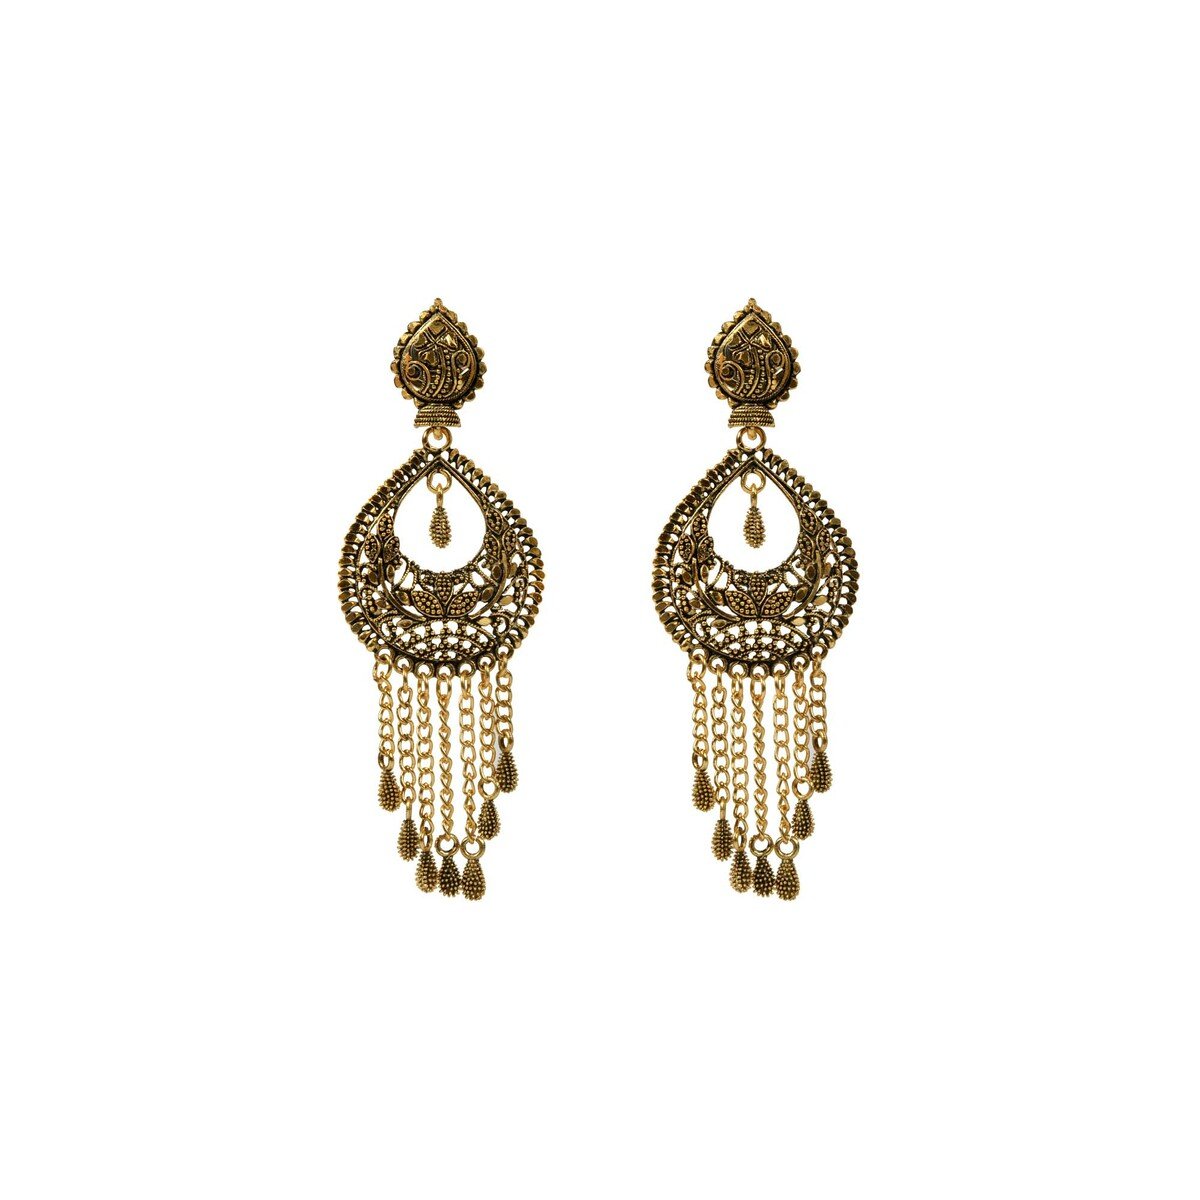 Eten Traditional Ethnic Earrings Antique Oxidized Gold Color WB002